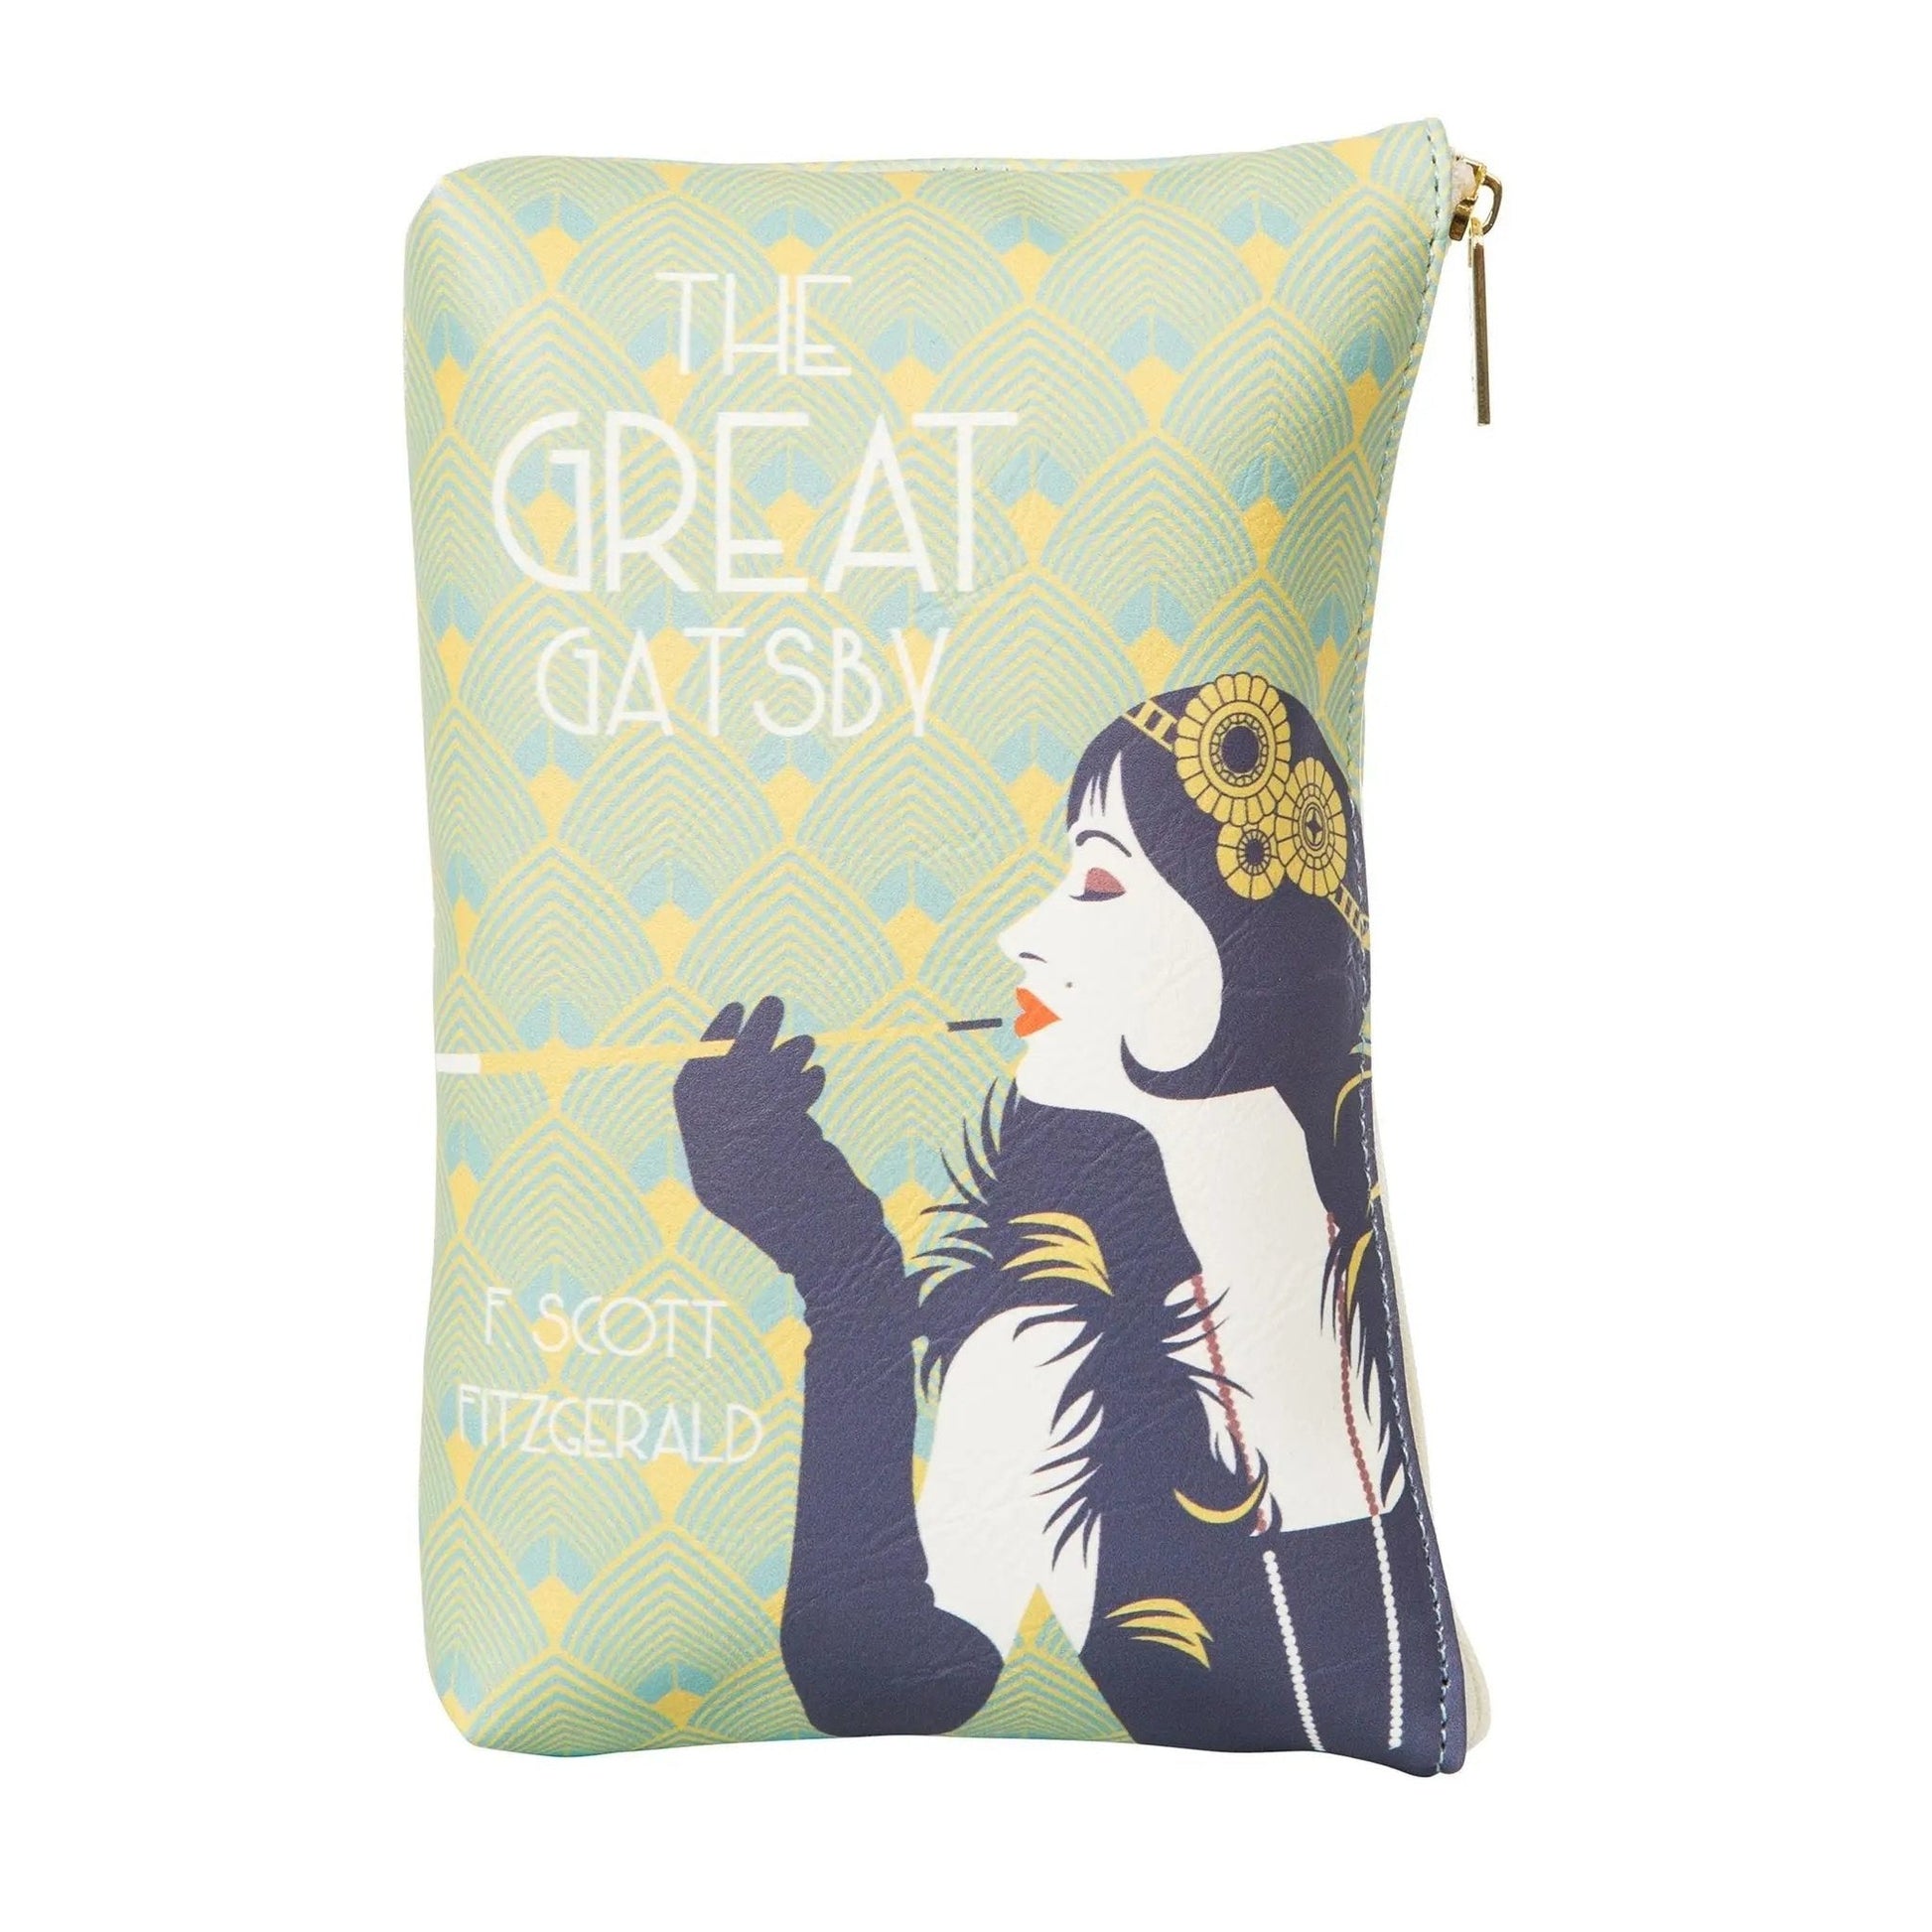 The Great Gatsby Lady Green Book Pouch Purse